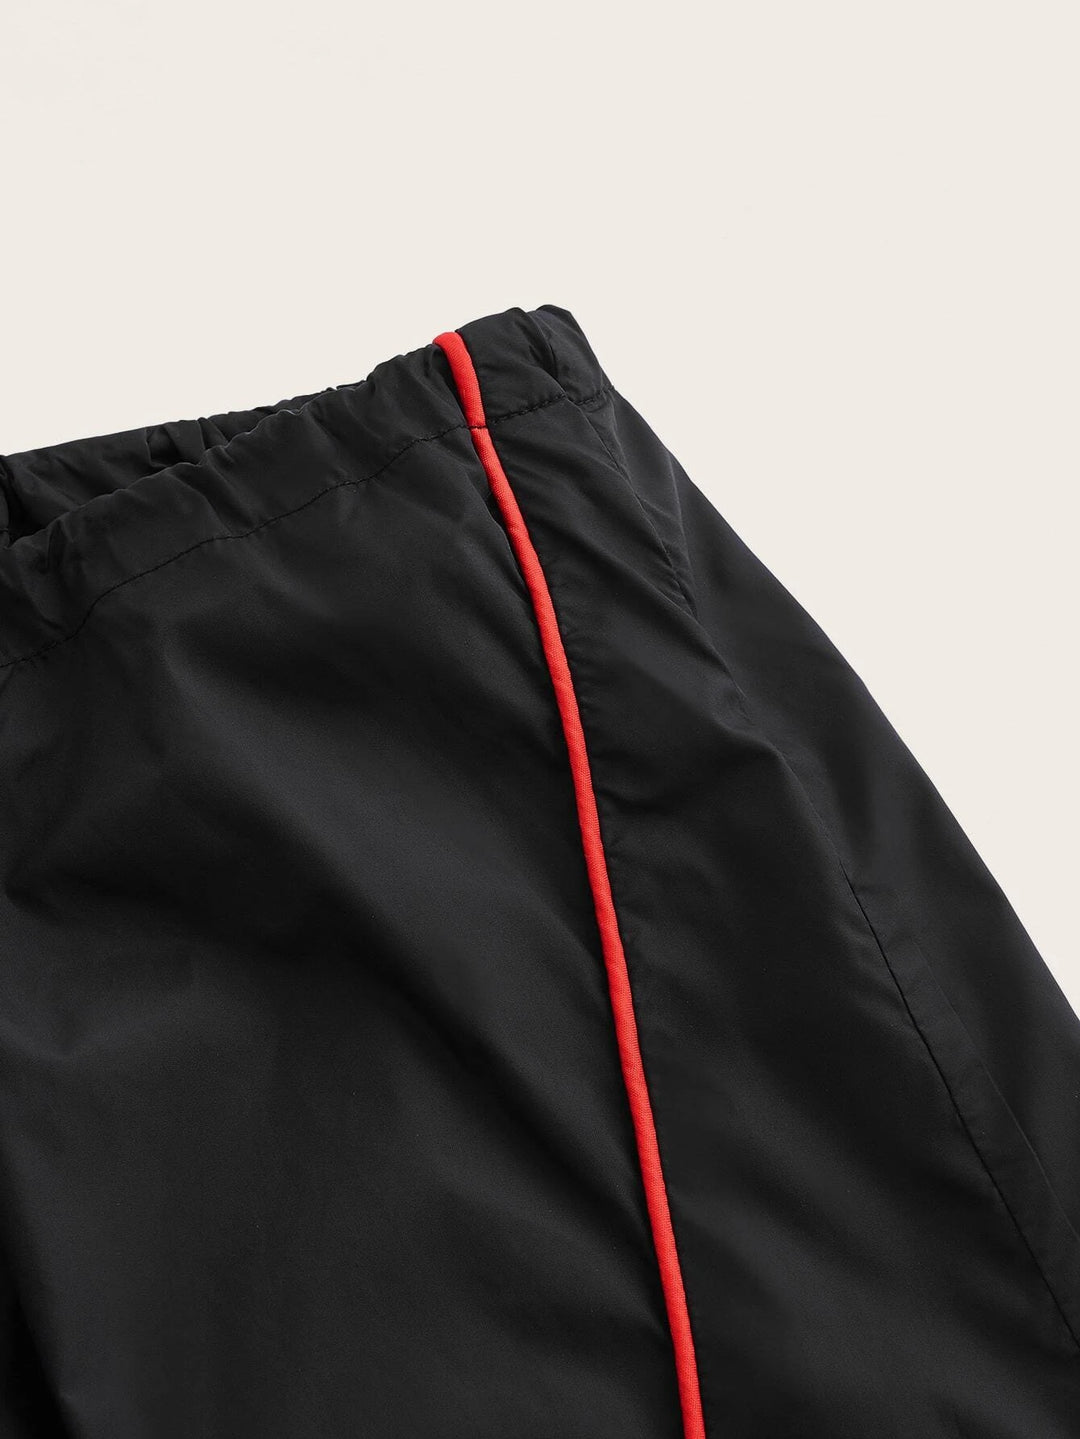 Contrast Piping Flap Pocket Cargo Parachute Pant